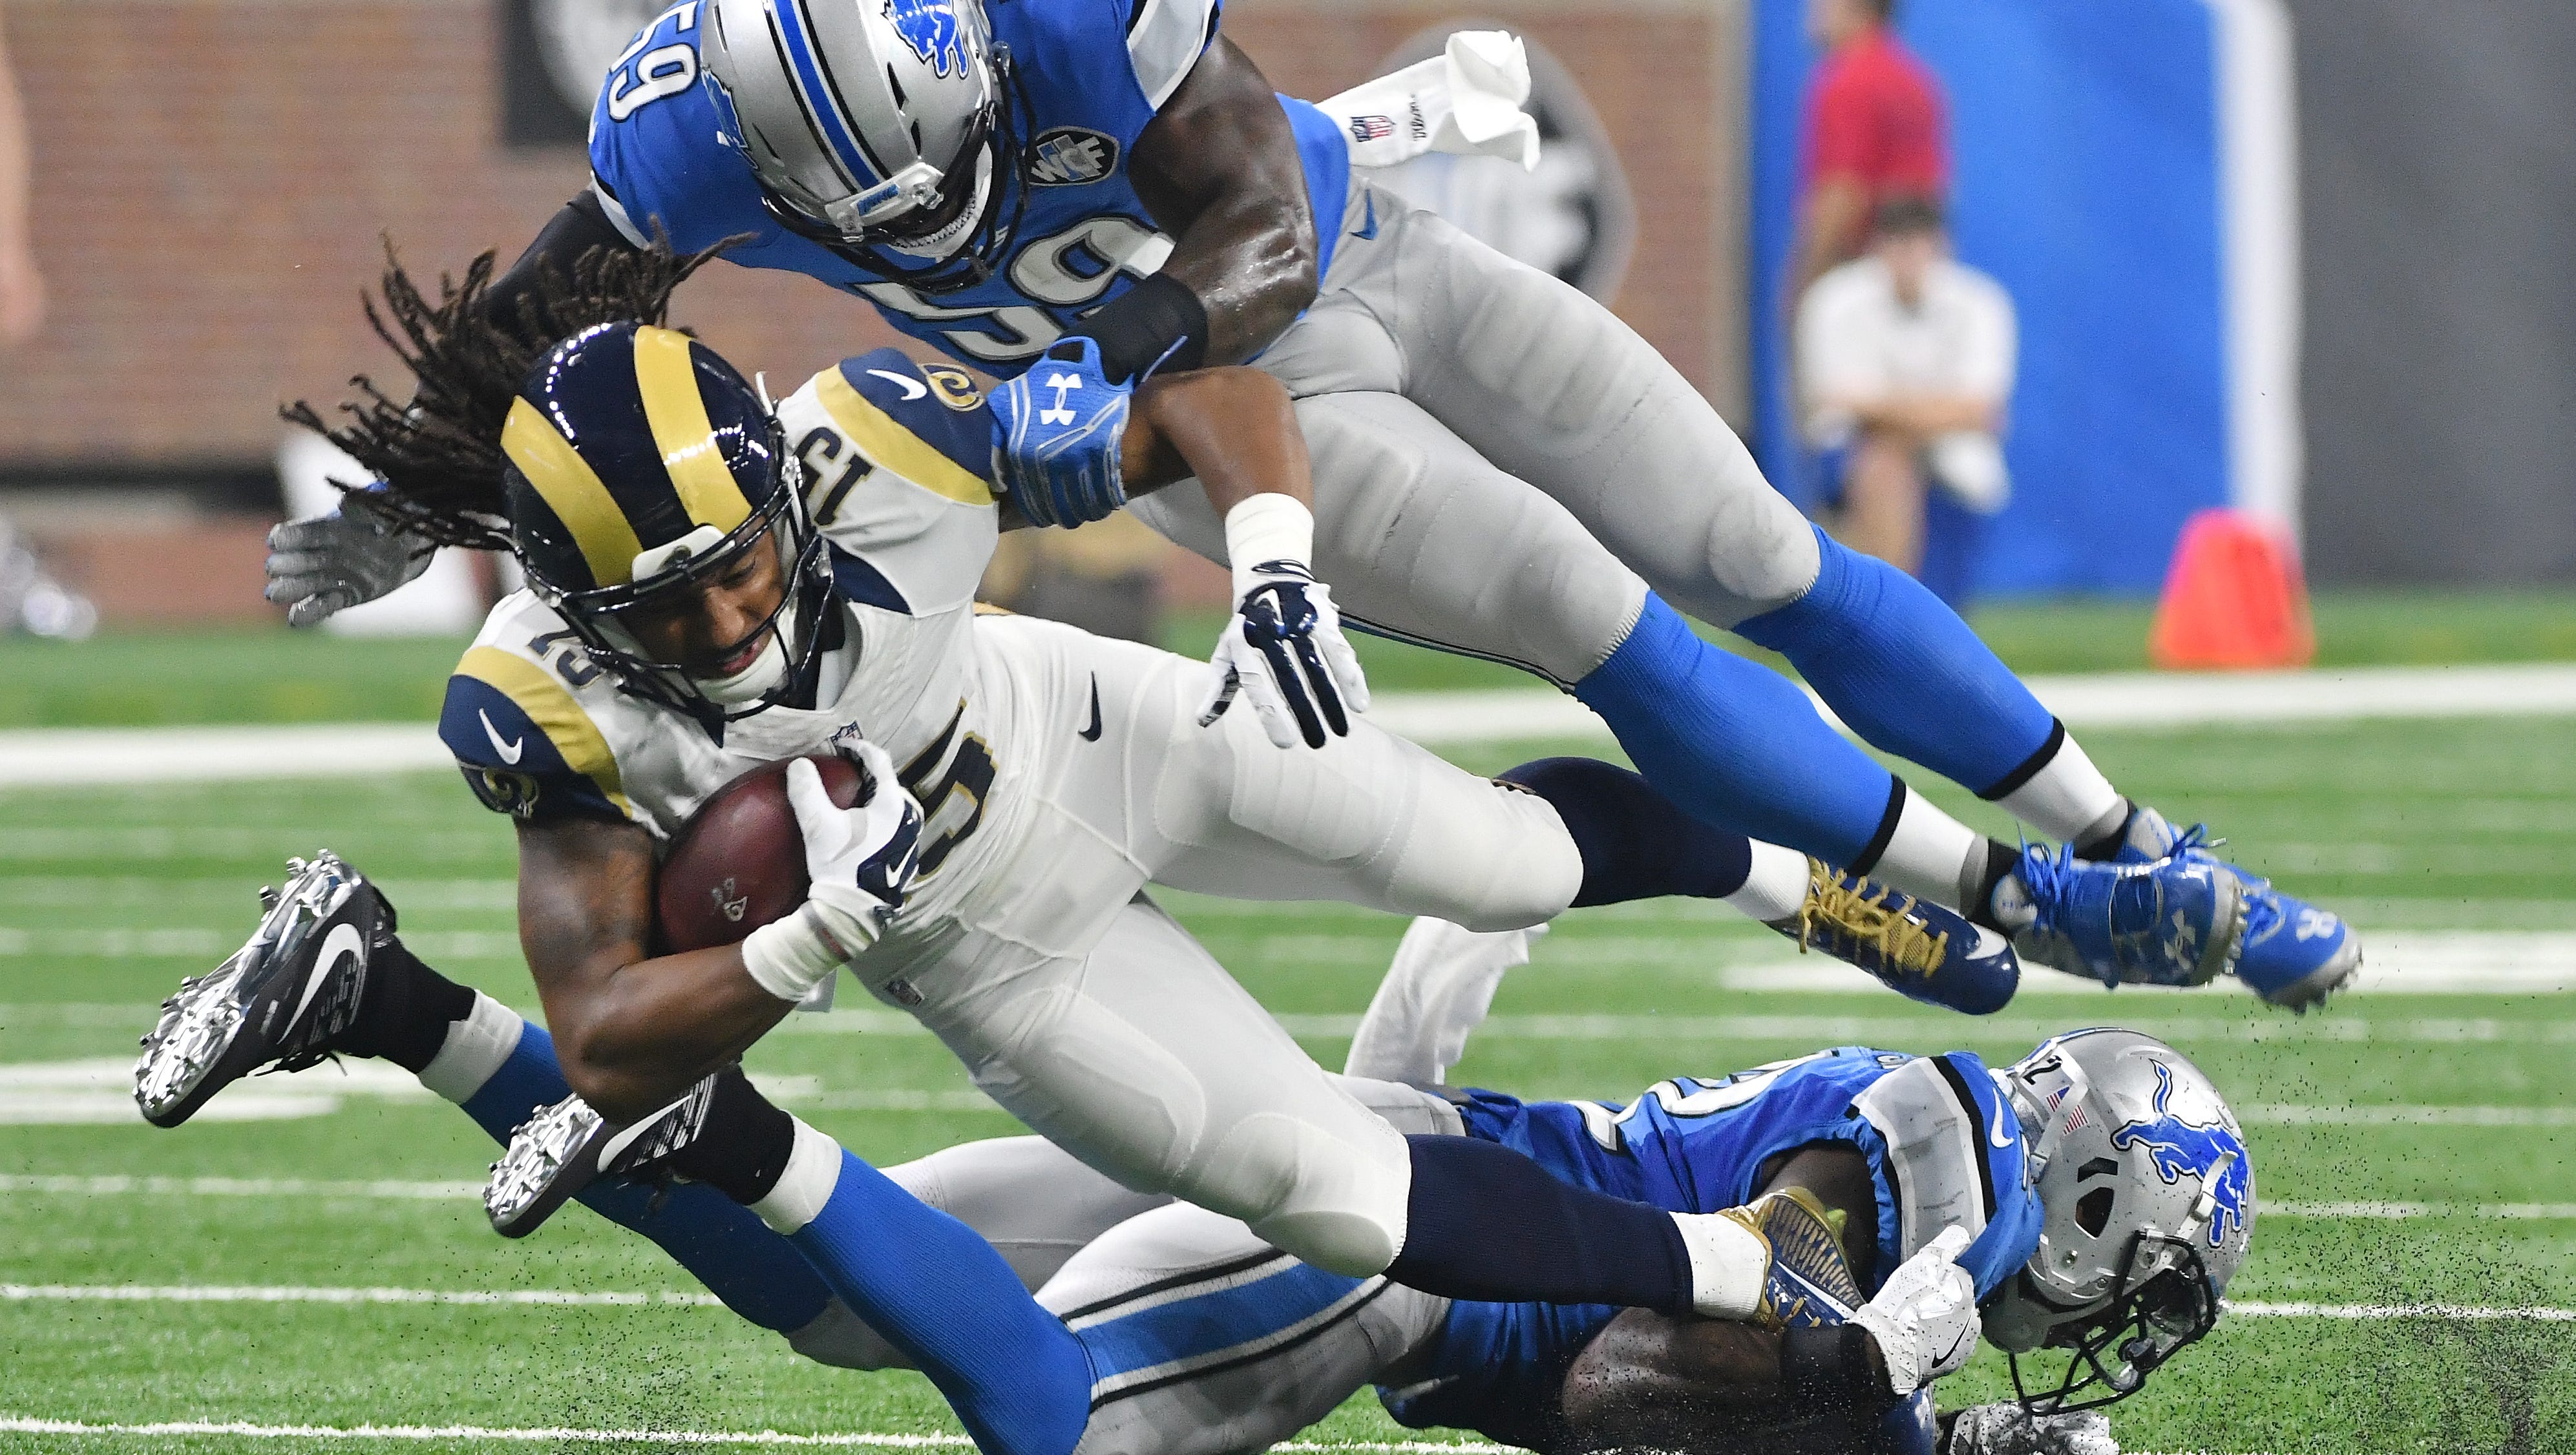 Lions defenders Tahir Whitehead and Tavon Wilson bring down the Rams' Bradley Marquez in the second quarter on Sunday.